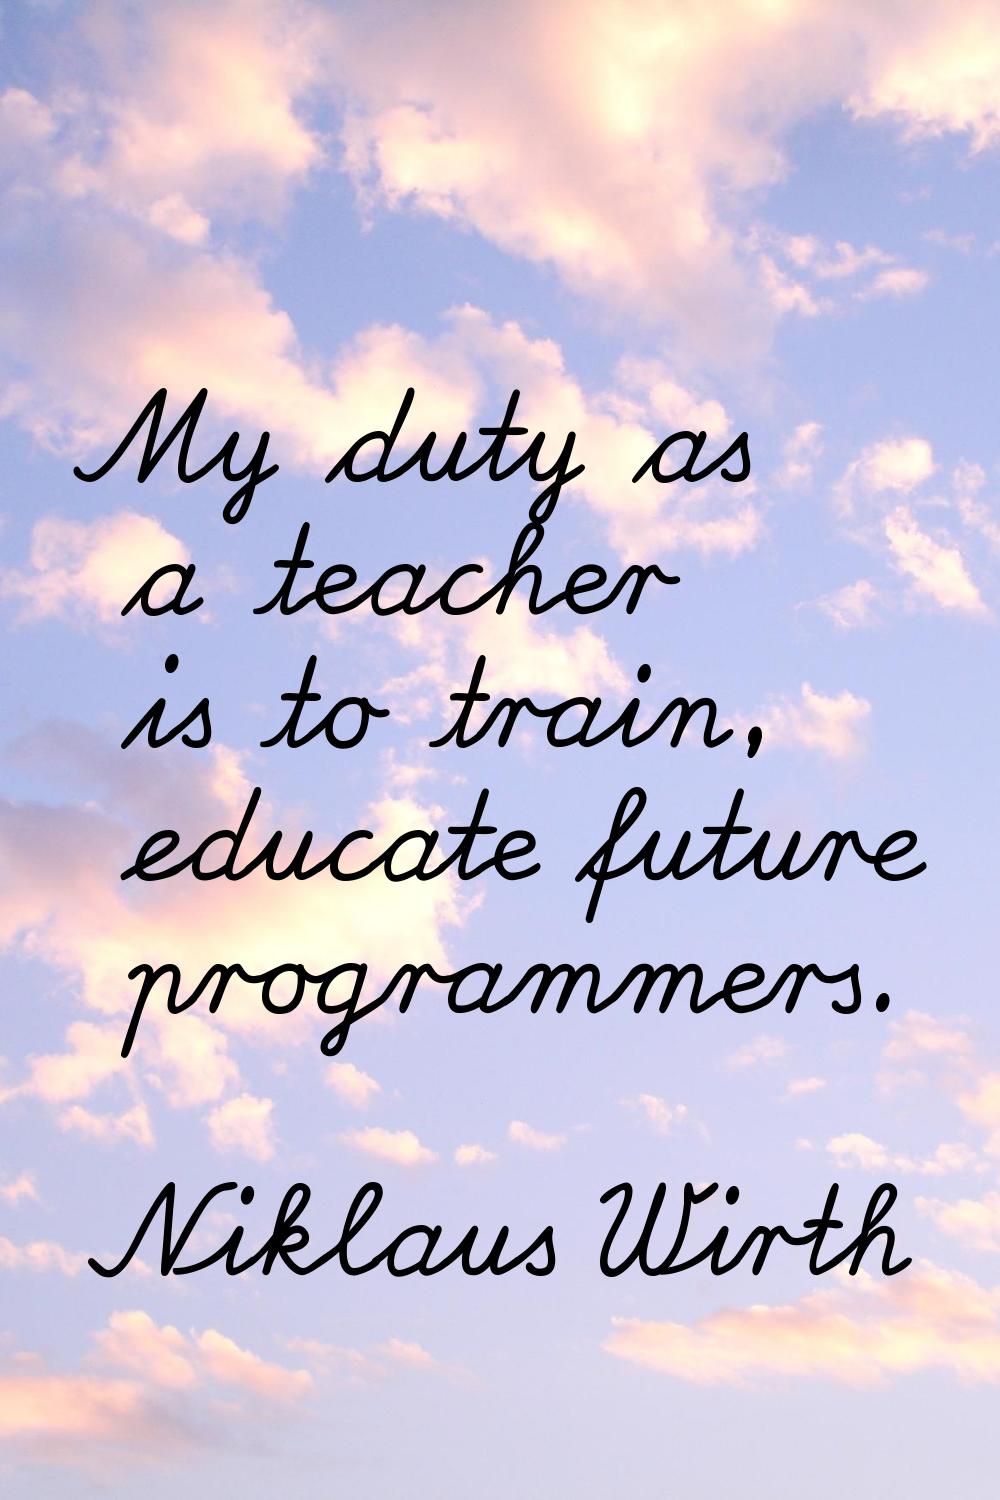 My duty as a teacher is to train, educate future programmers.